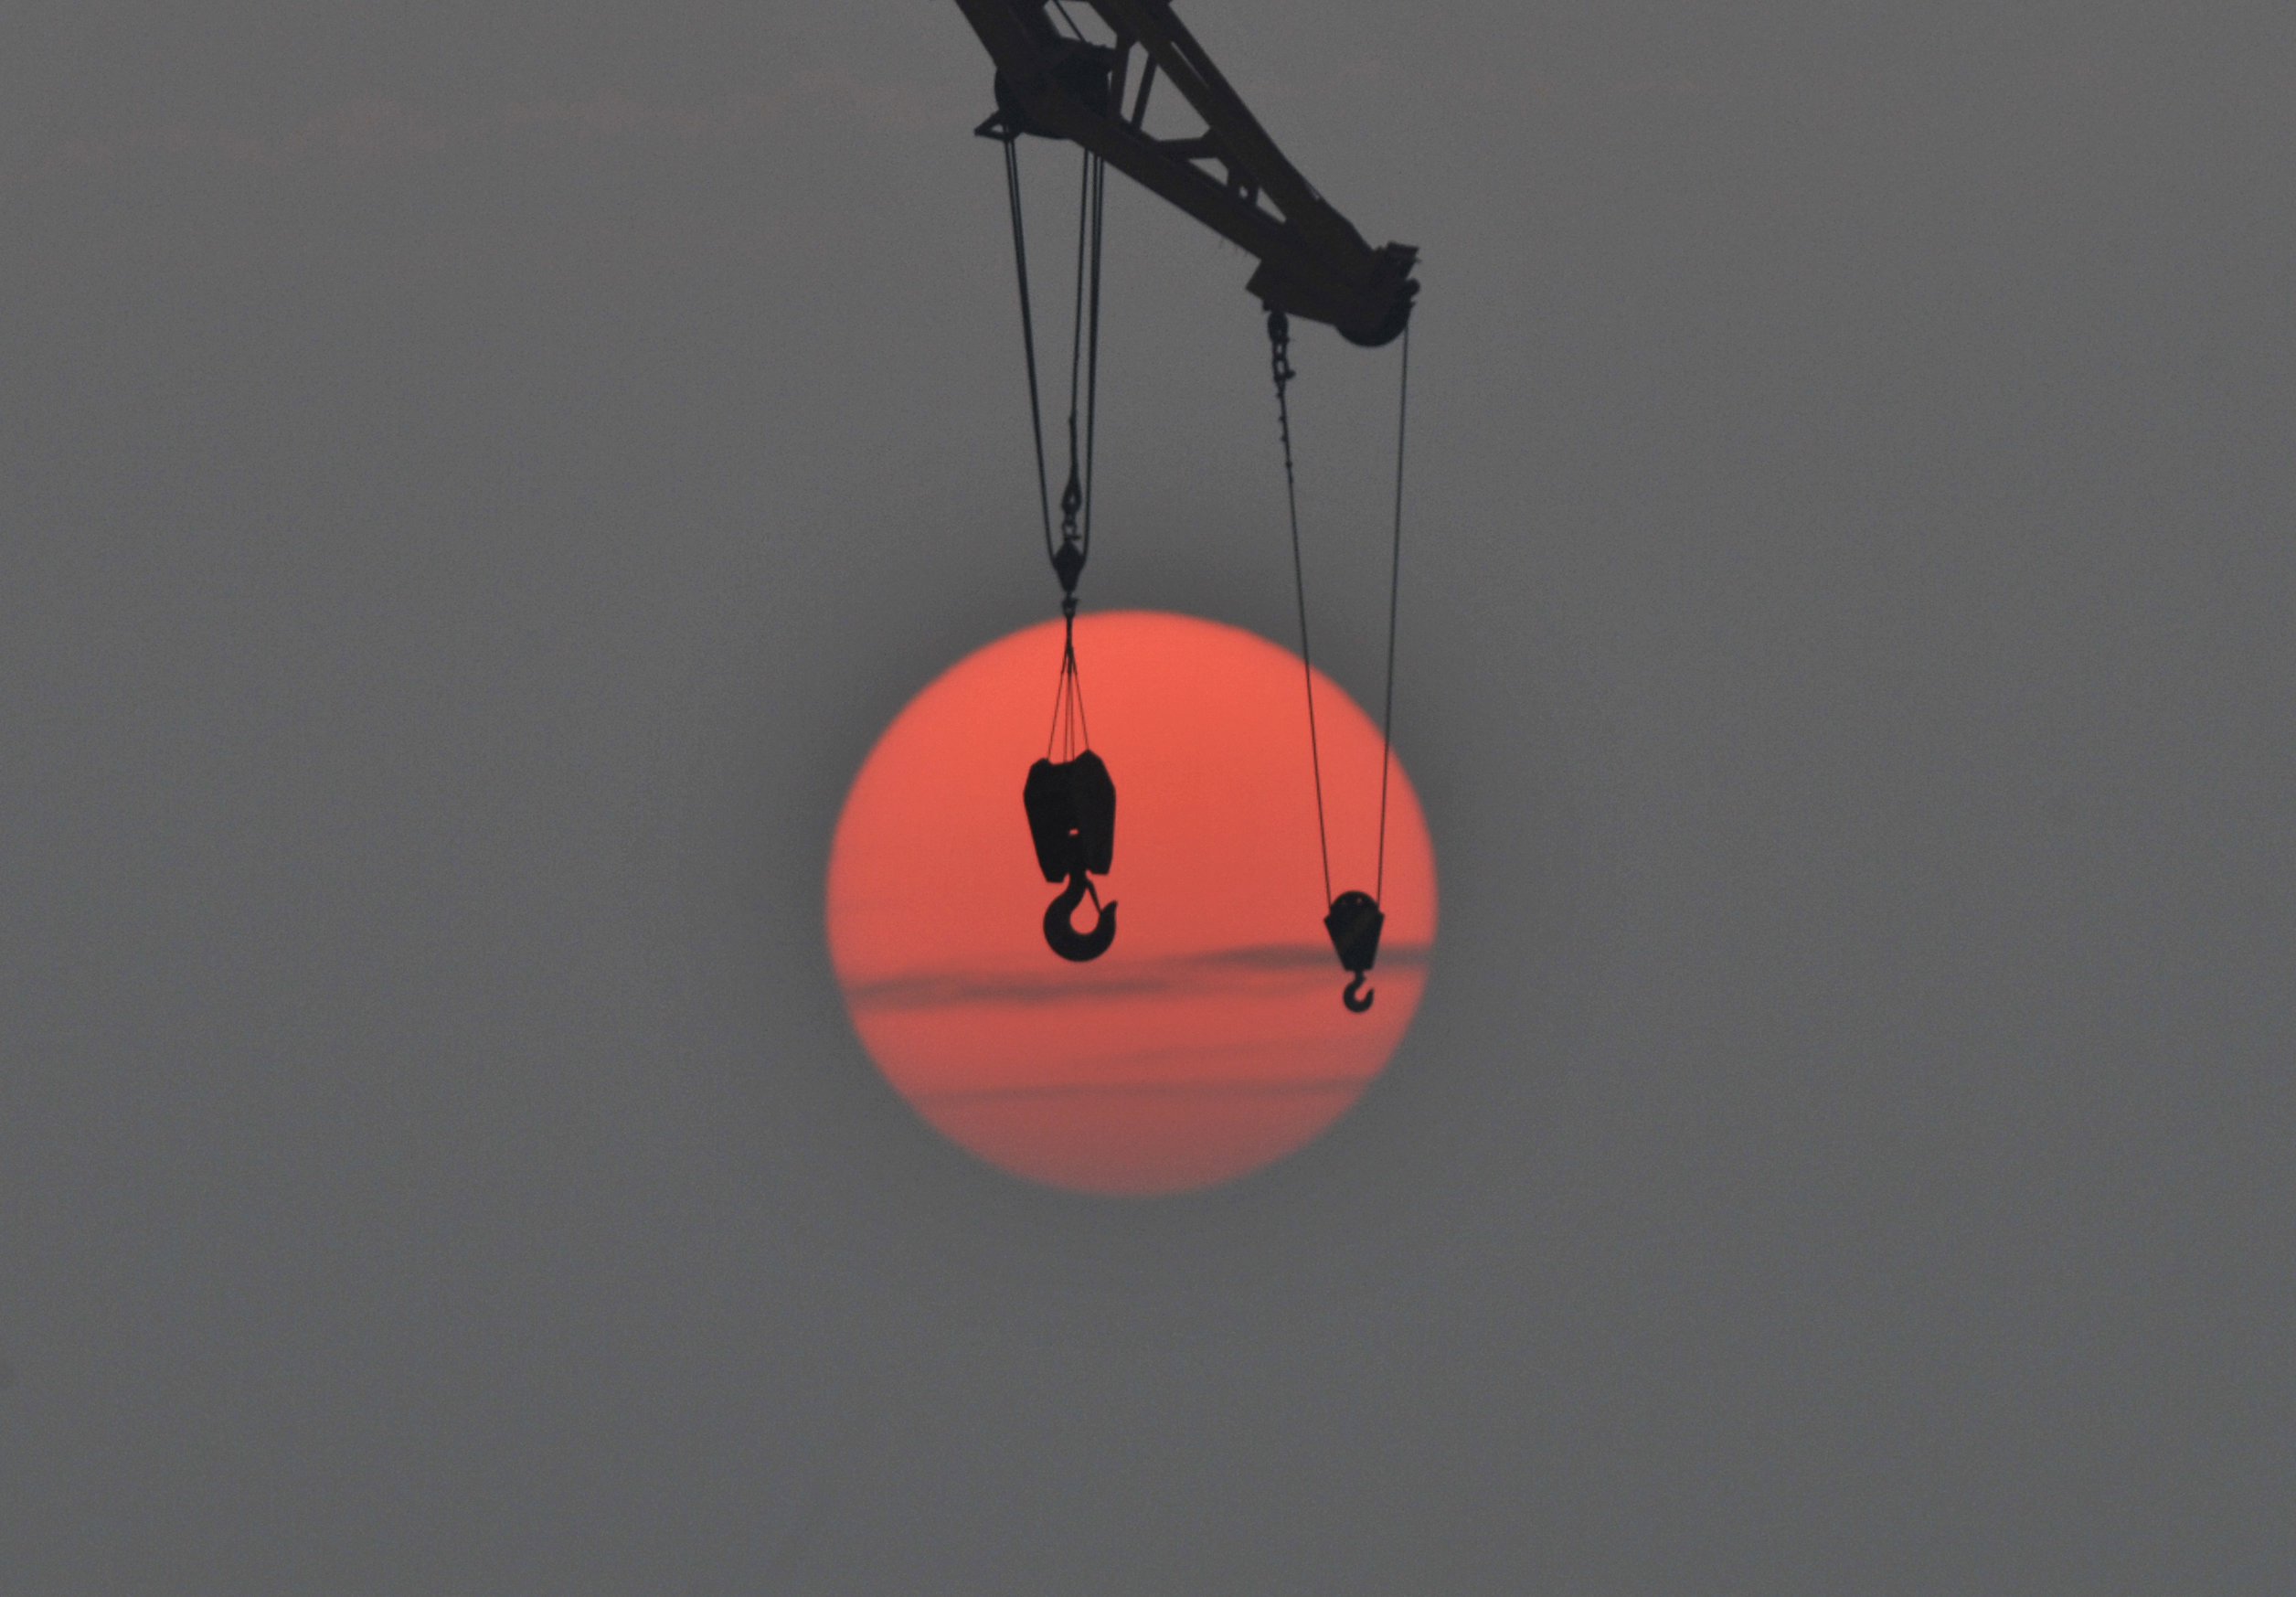 The hooks of a crane are pictured in front of the setting sun, at a port in Qingdao, Shandong province, China, October 14, 2015. China's economic planner said it approved 218 fixed-asset projects worth 1.81 trillion yuan ($285.3 billion) in the first nine months of the year, as Beijing looks to drive infrastructure investment to support slowing economic growth. Picture taken October 14, 2015. REUTERS/China Daily CHINA OUT. NO COMMERCIAL OR EDITORIAL SALES IN CHINA.